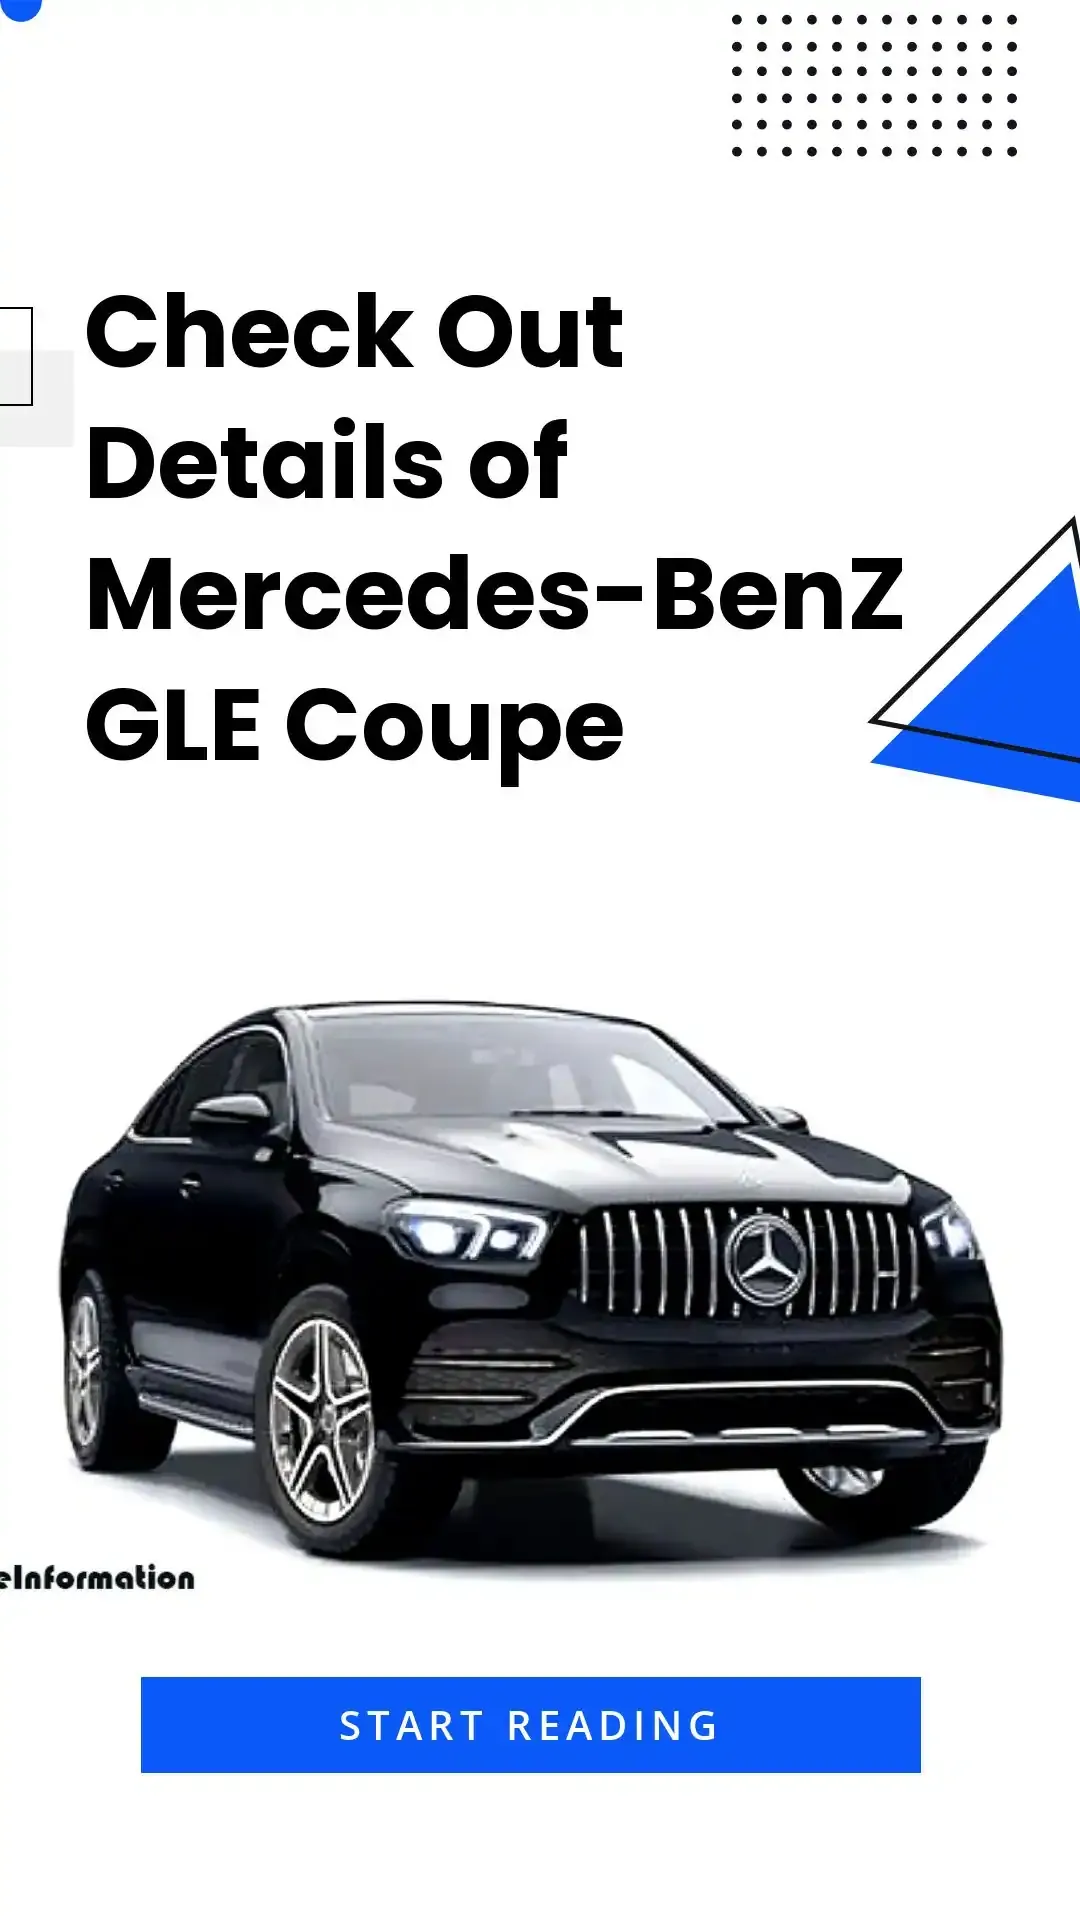 Mercedes-BenZ GLE Coupe